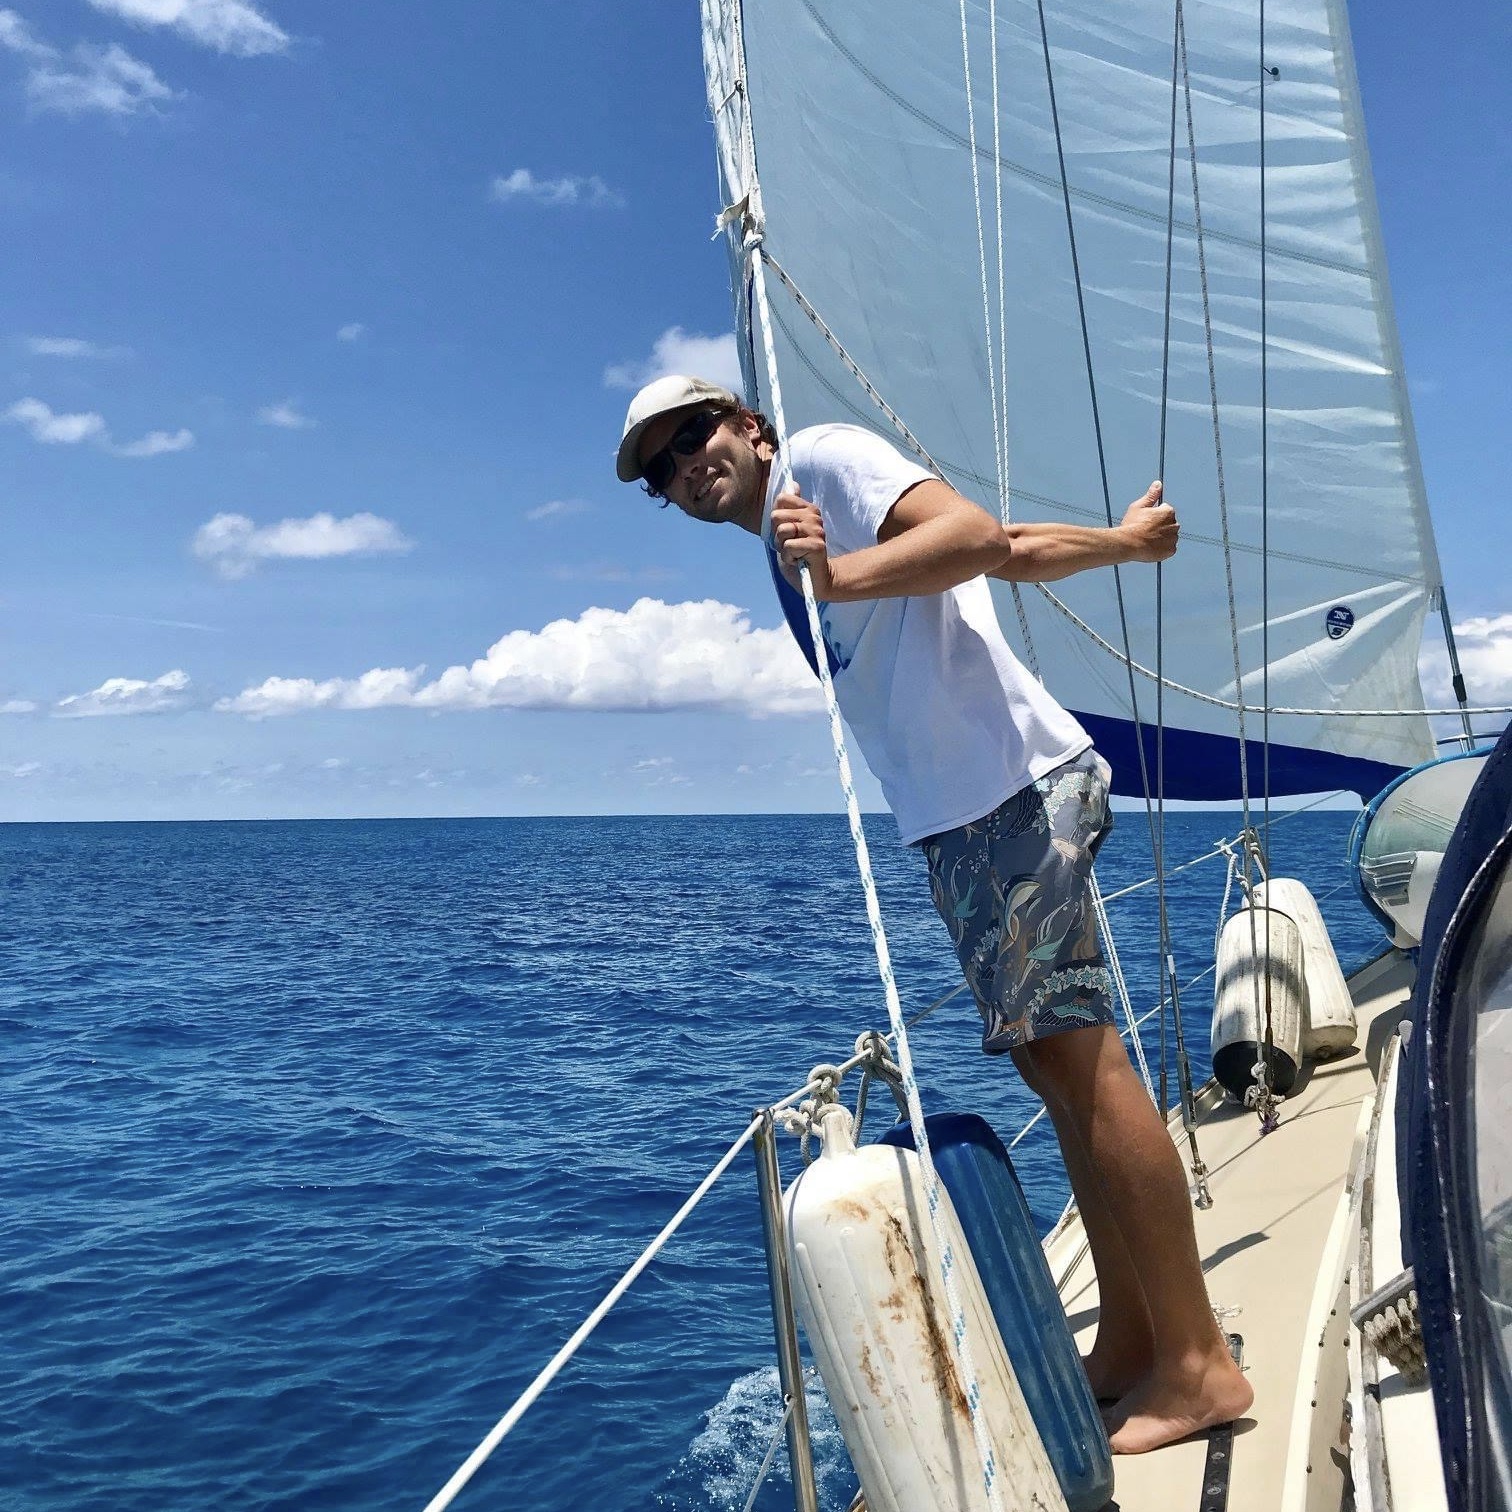 Embracing the ocean breeze while sailing.